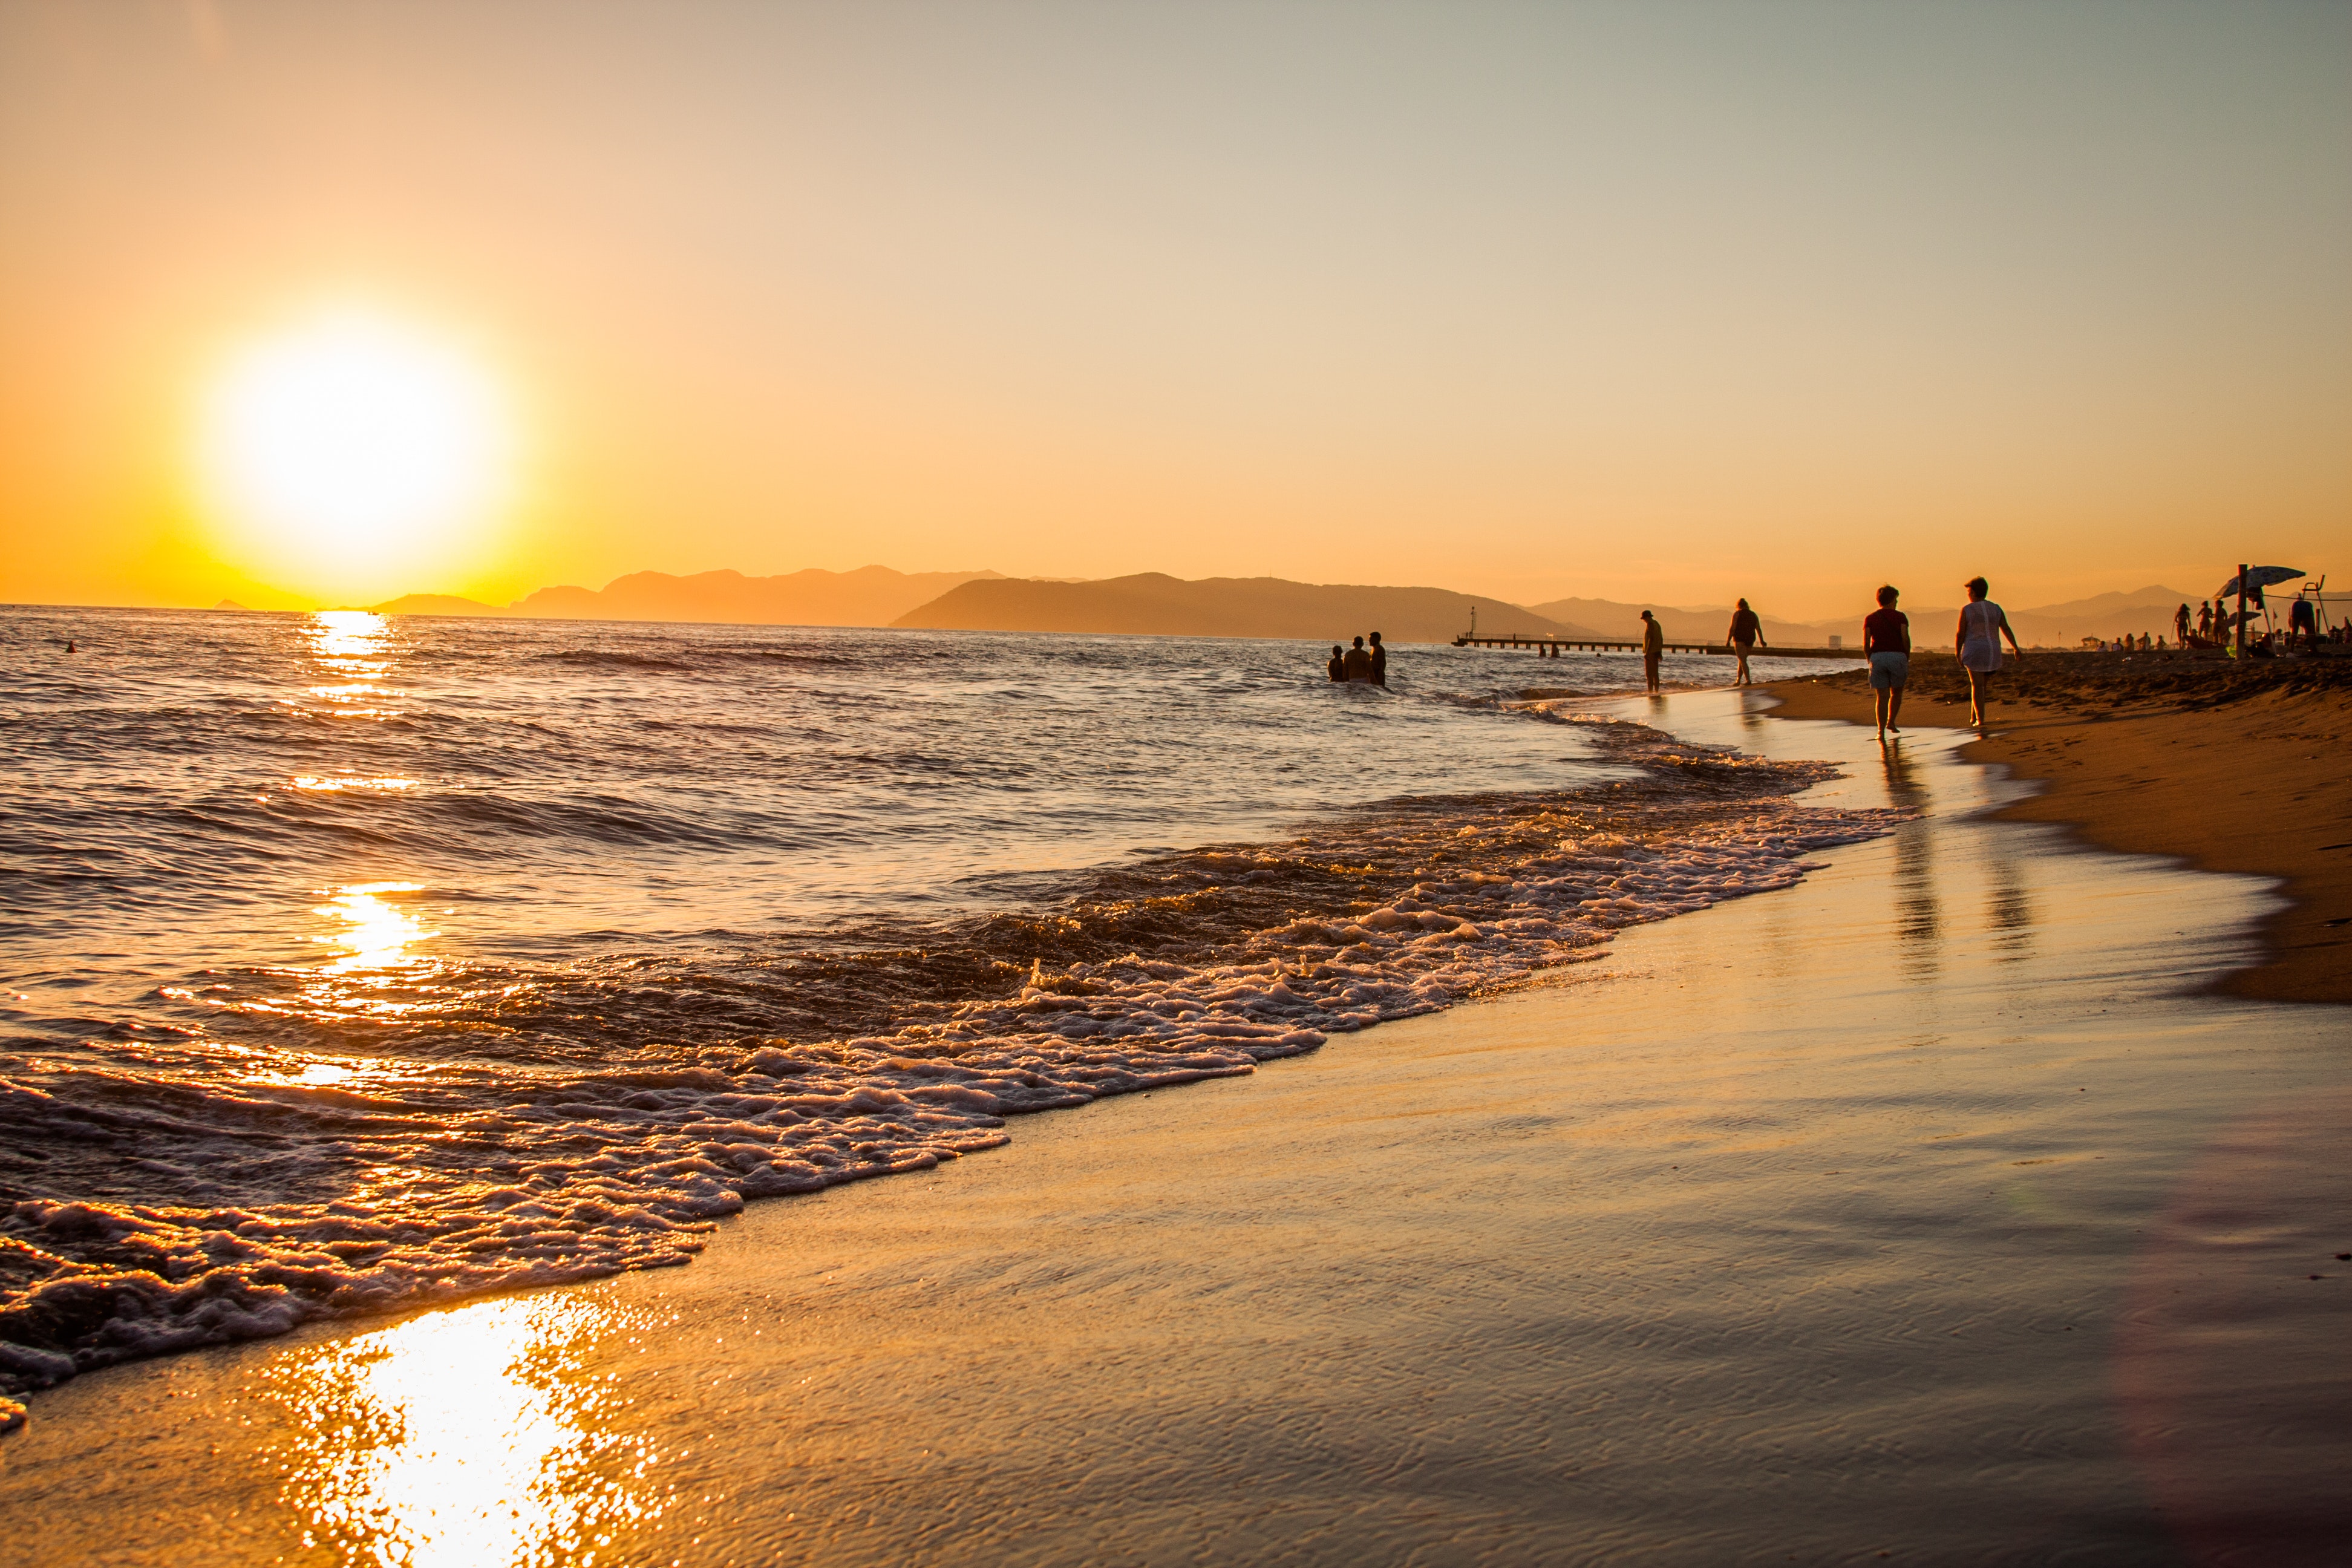 Group of people walking at the shoreline during golden hour photo